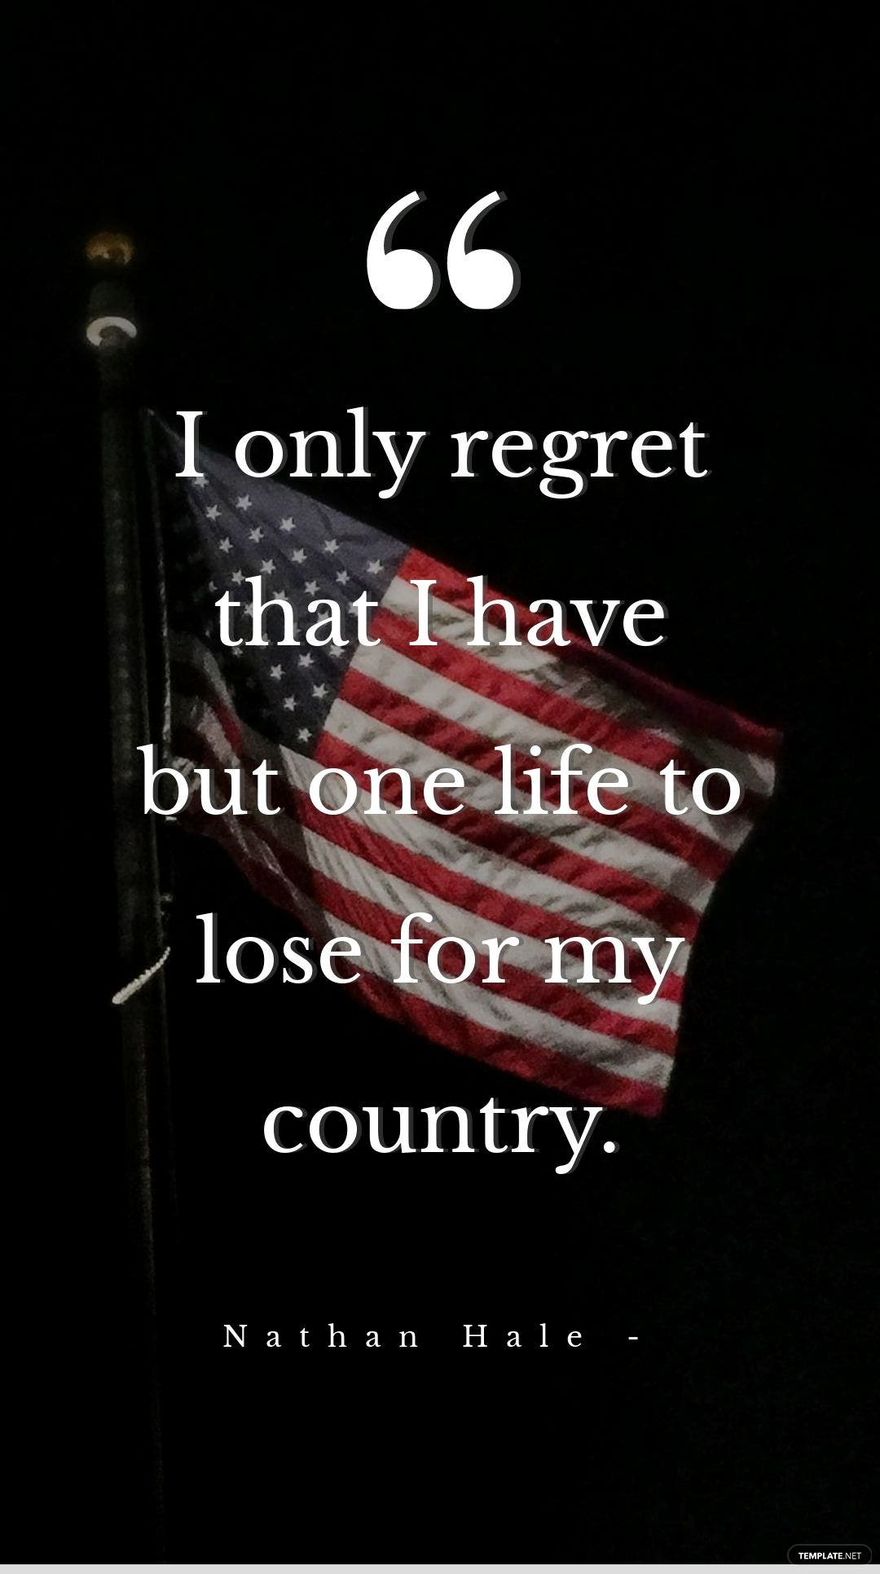 Nathan Hale - I only regret that I have but one life to lose for my country. in JPG